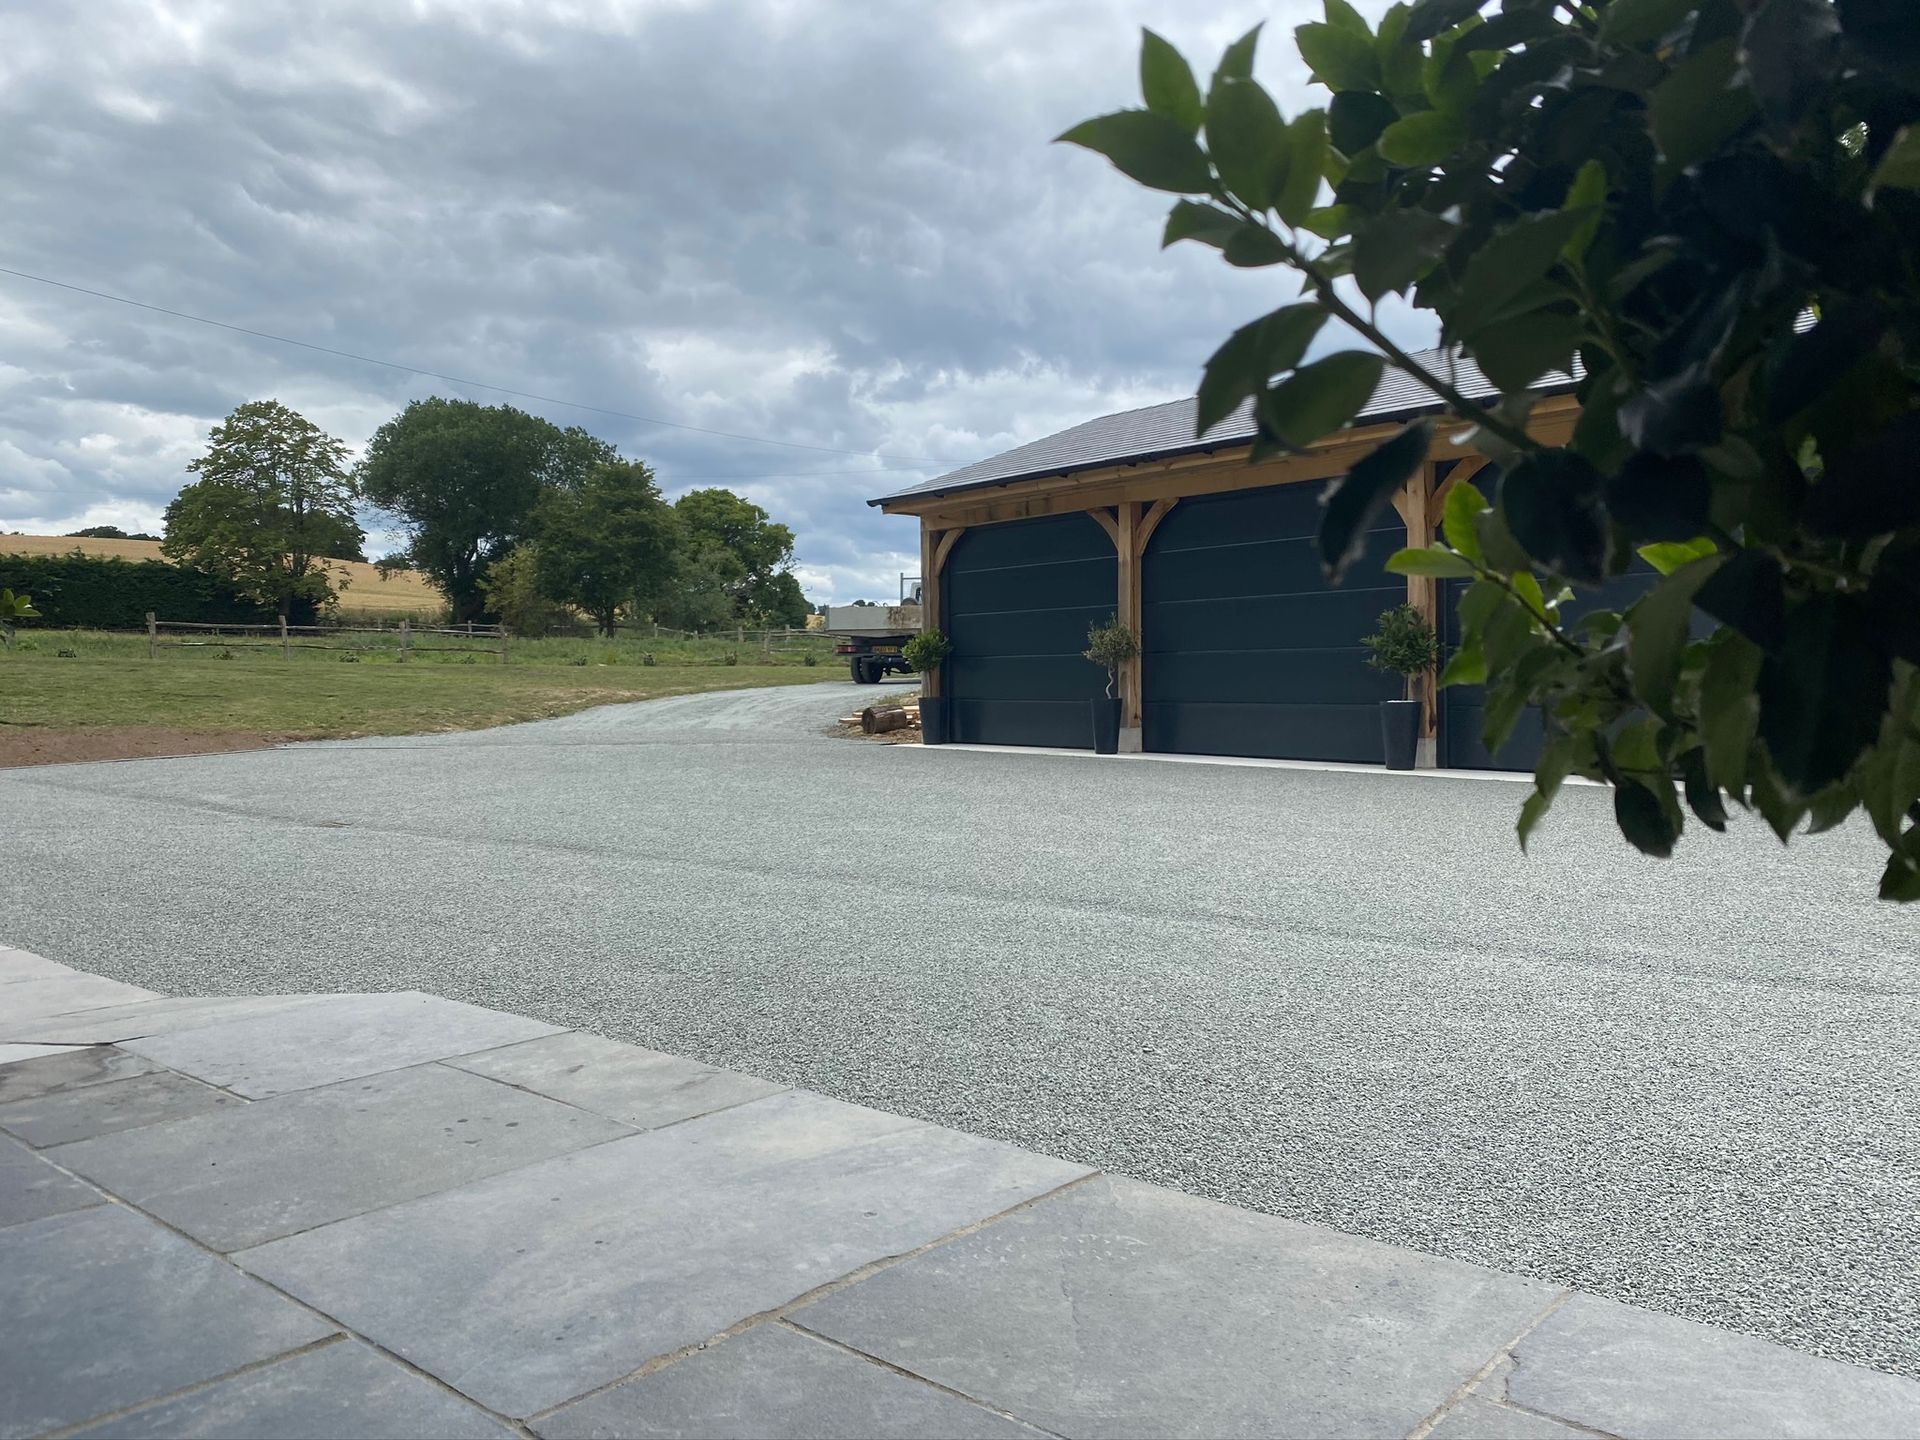 A driveway with gravel and a garage in the background